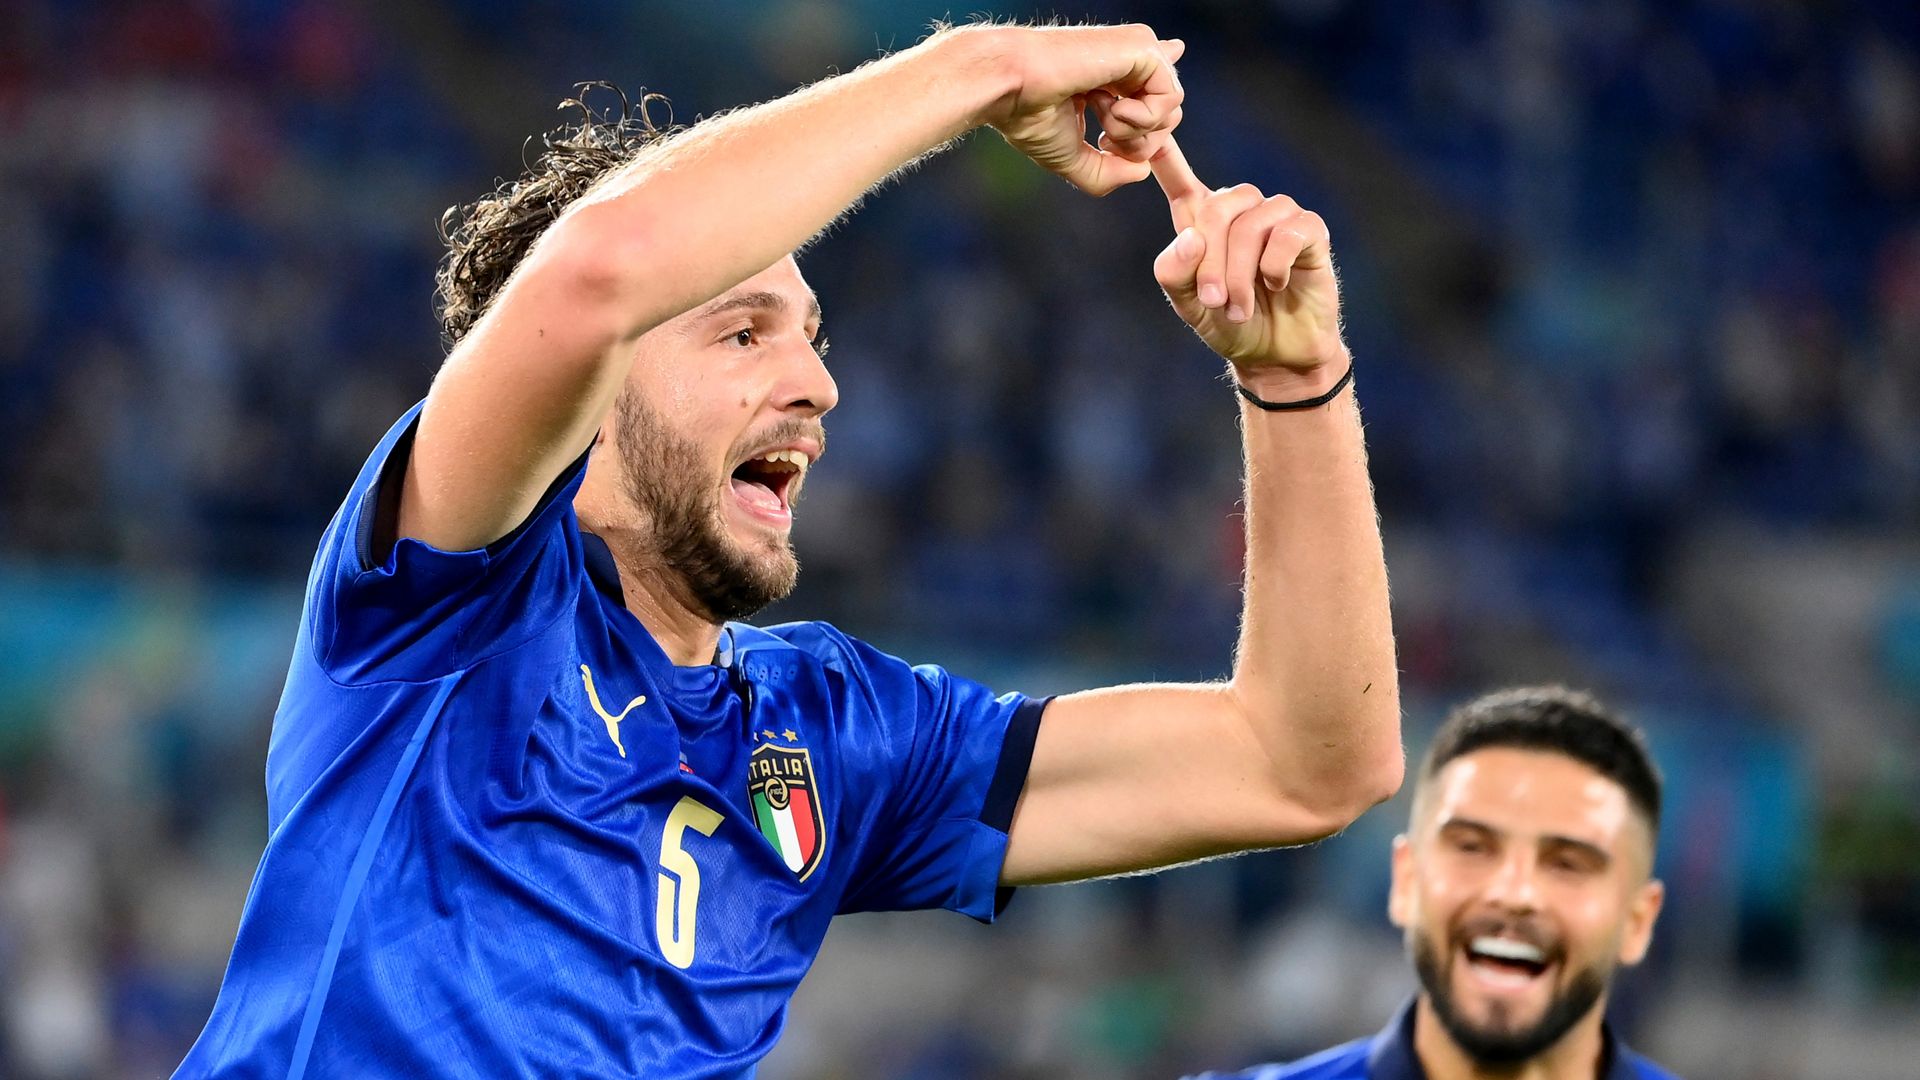 Italy ease past Switzerland to reach last 16 in style